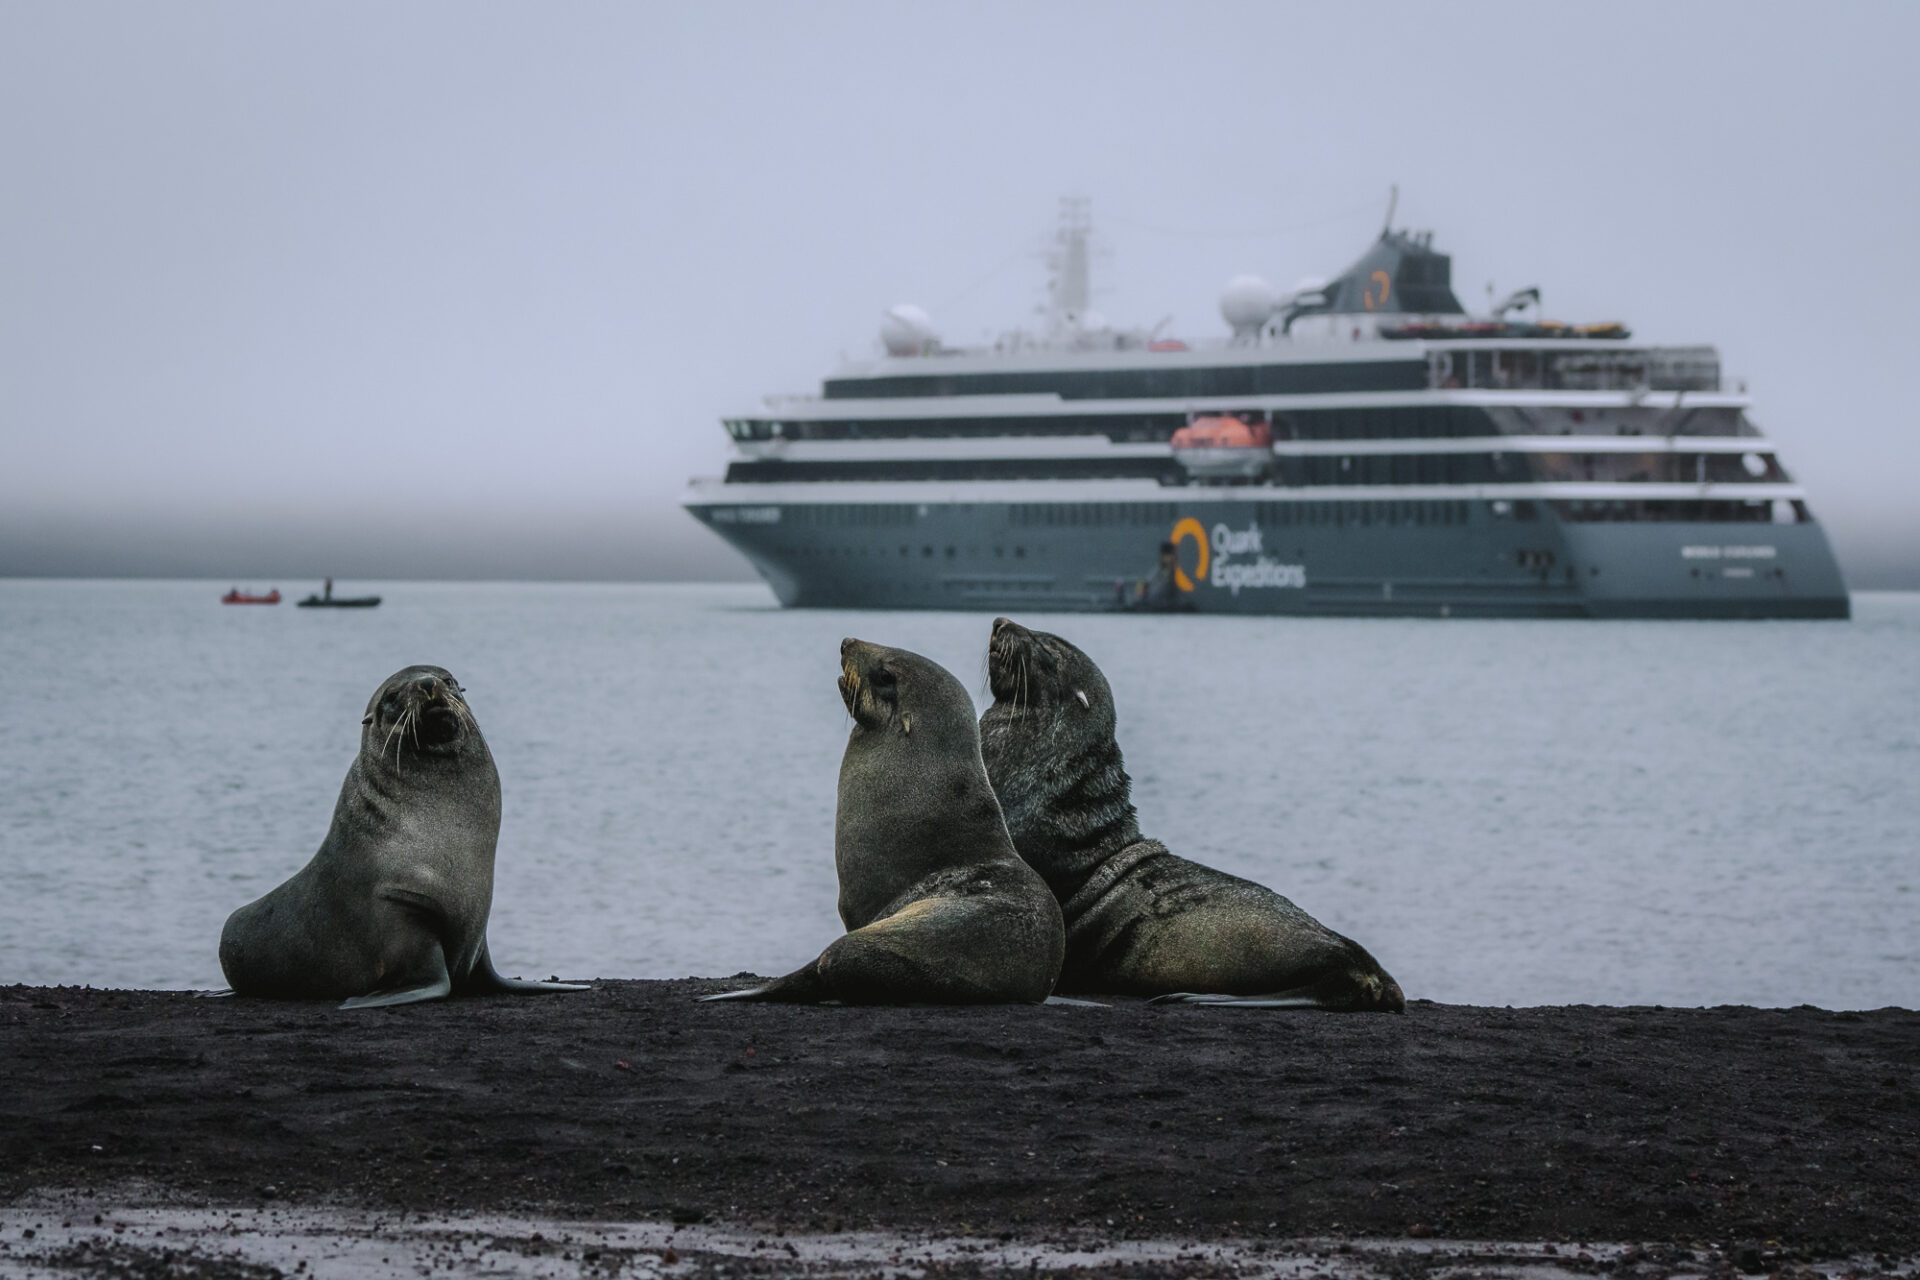 A group of seals on a beach with Quark Expeditions ship in the background